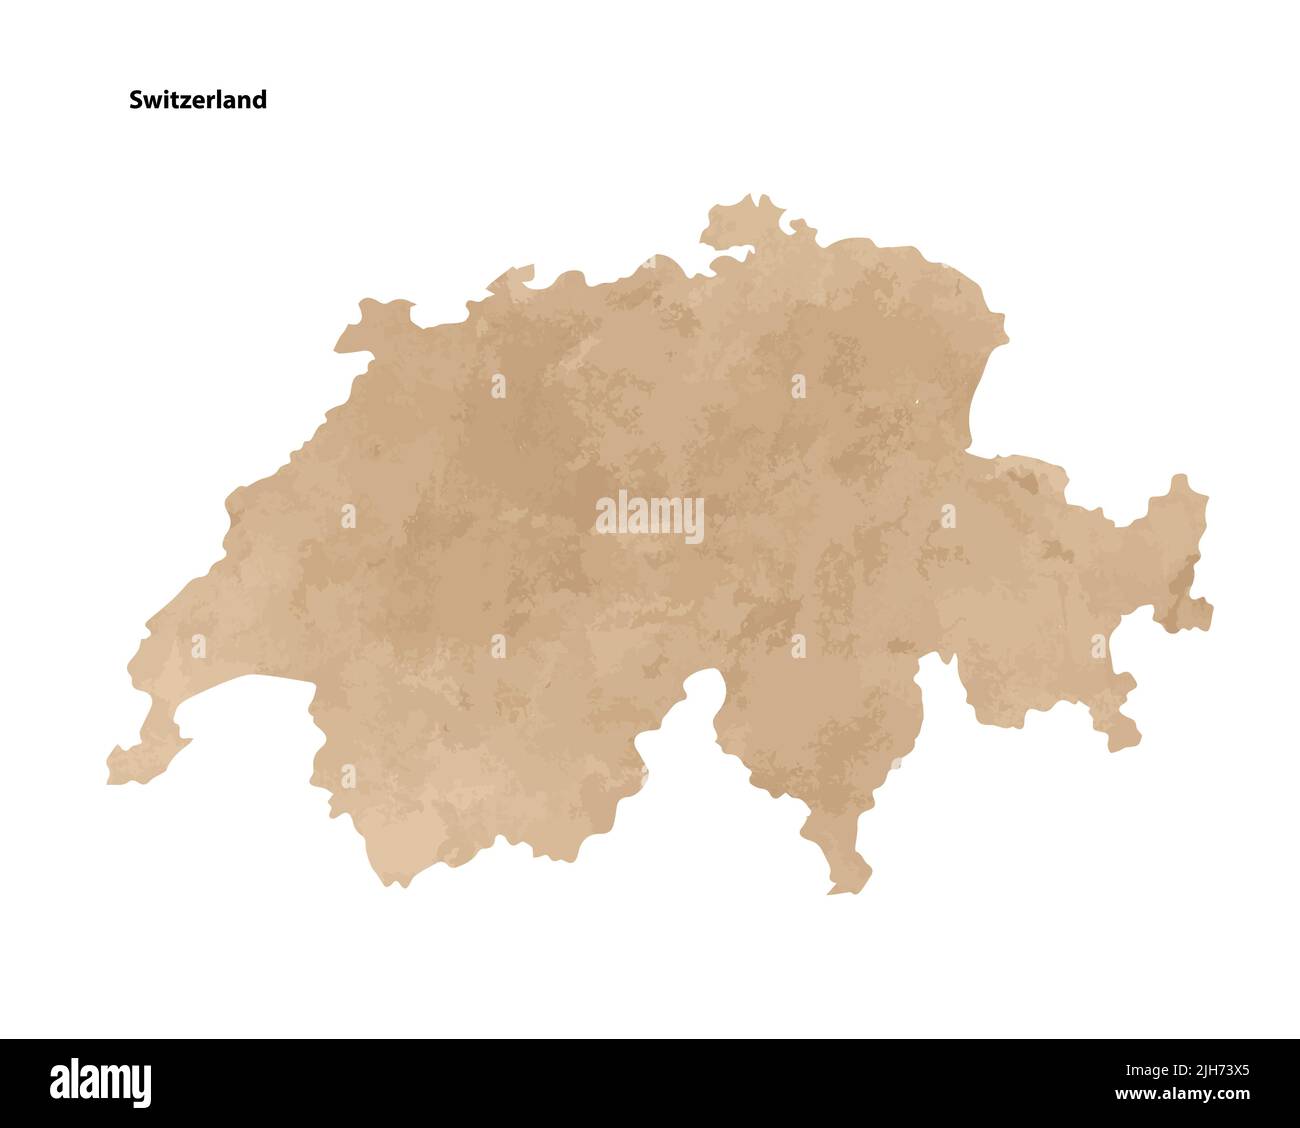 Old vintage paper textured map of Switzerland Country - Vector illustration Stock Vector